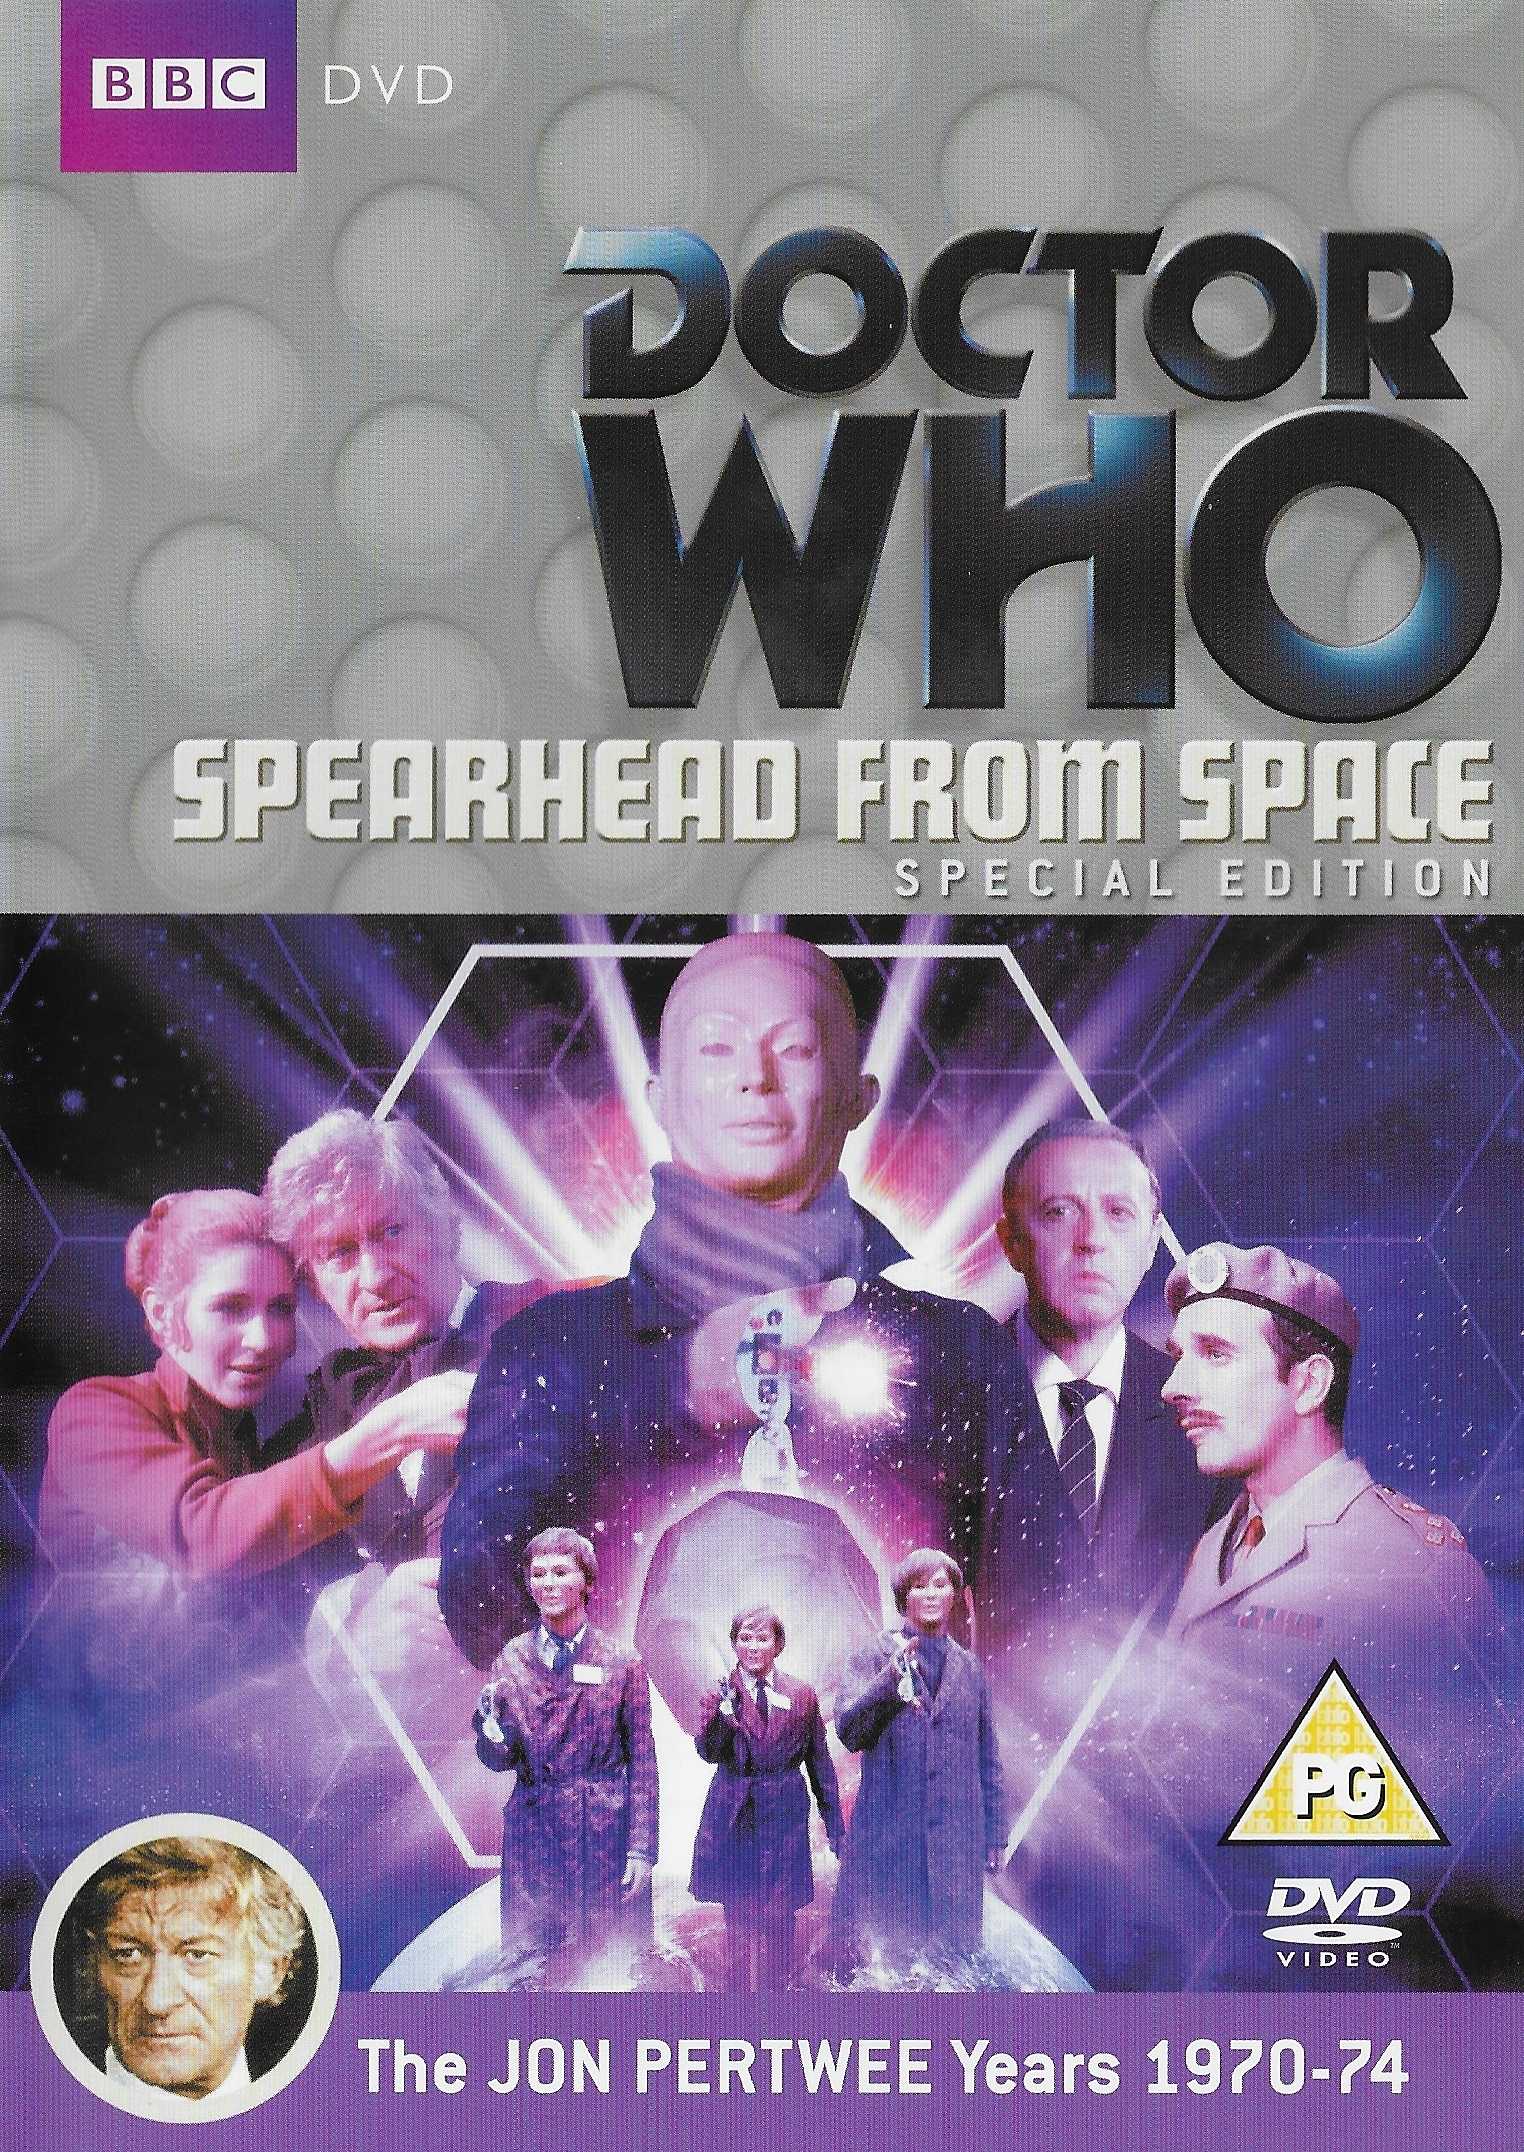 Picture of BBCDVD 3135A Doctor Who - Spearhead from space by artist Robert Holmes from the BBC dvds - Records and Tapes library